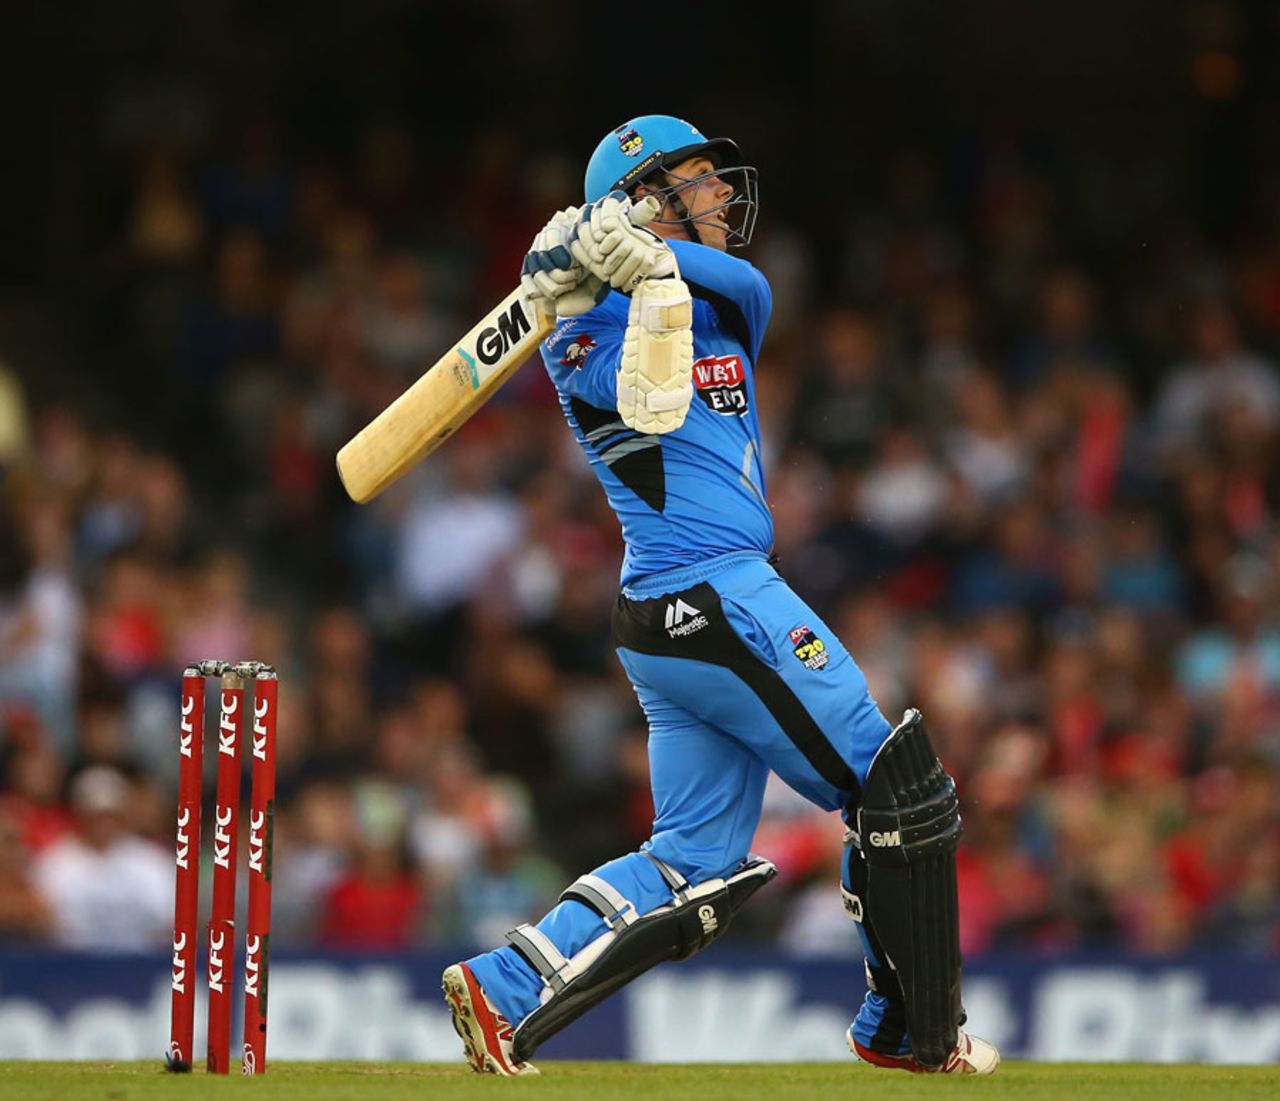 Travis Head launched seven fours and four sixes during his 34-ball 71, Melbourne Renegades v Adelaide Strikers, BBL 2014-15, Melbourne, January 19, 2015